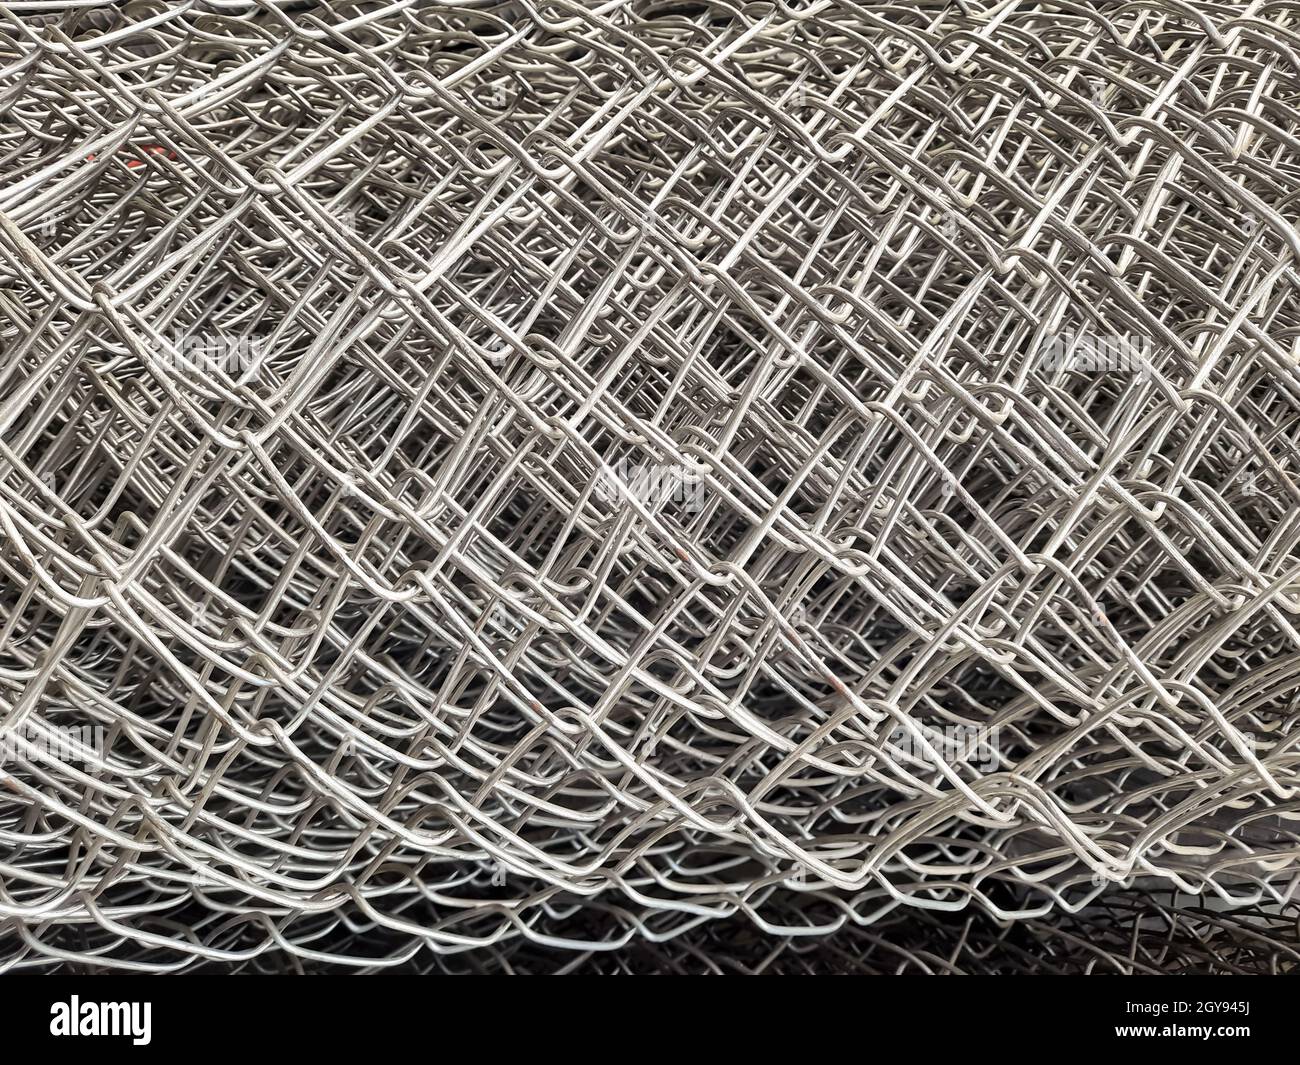 Rolls of iron mesh Concrete reinforcing steel used in construction. Stock Photo